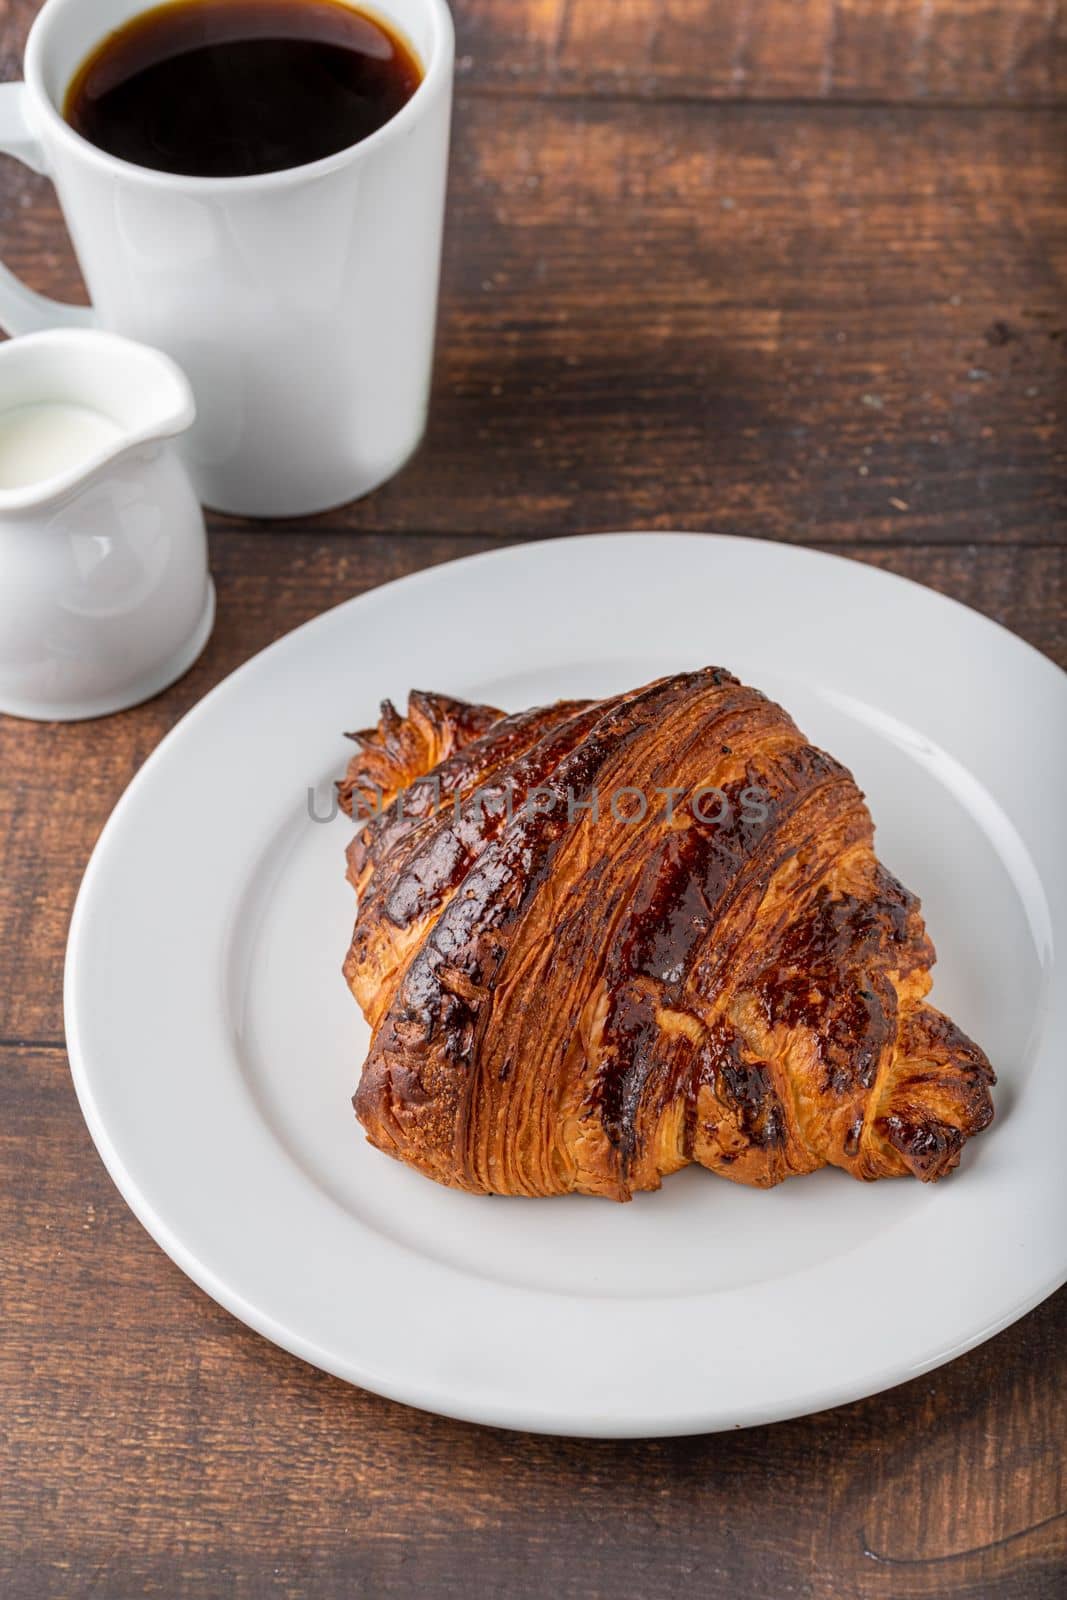 Croissant with coffee next to it on wooden table